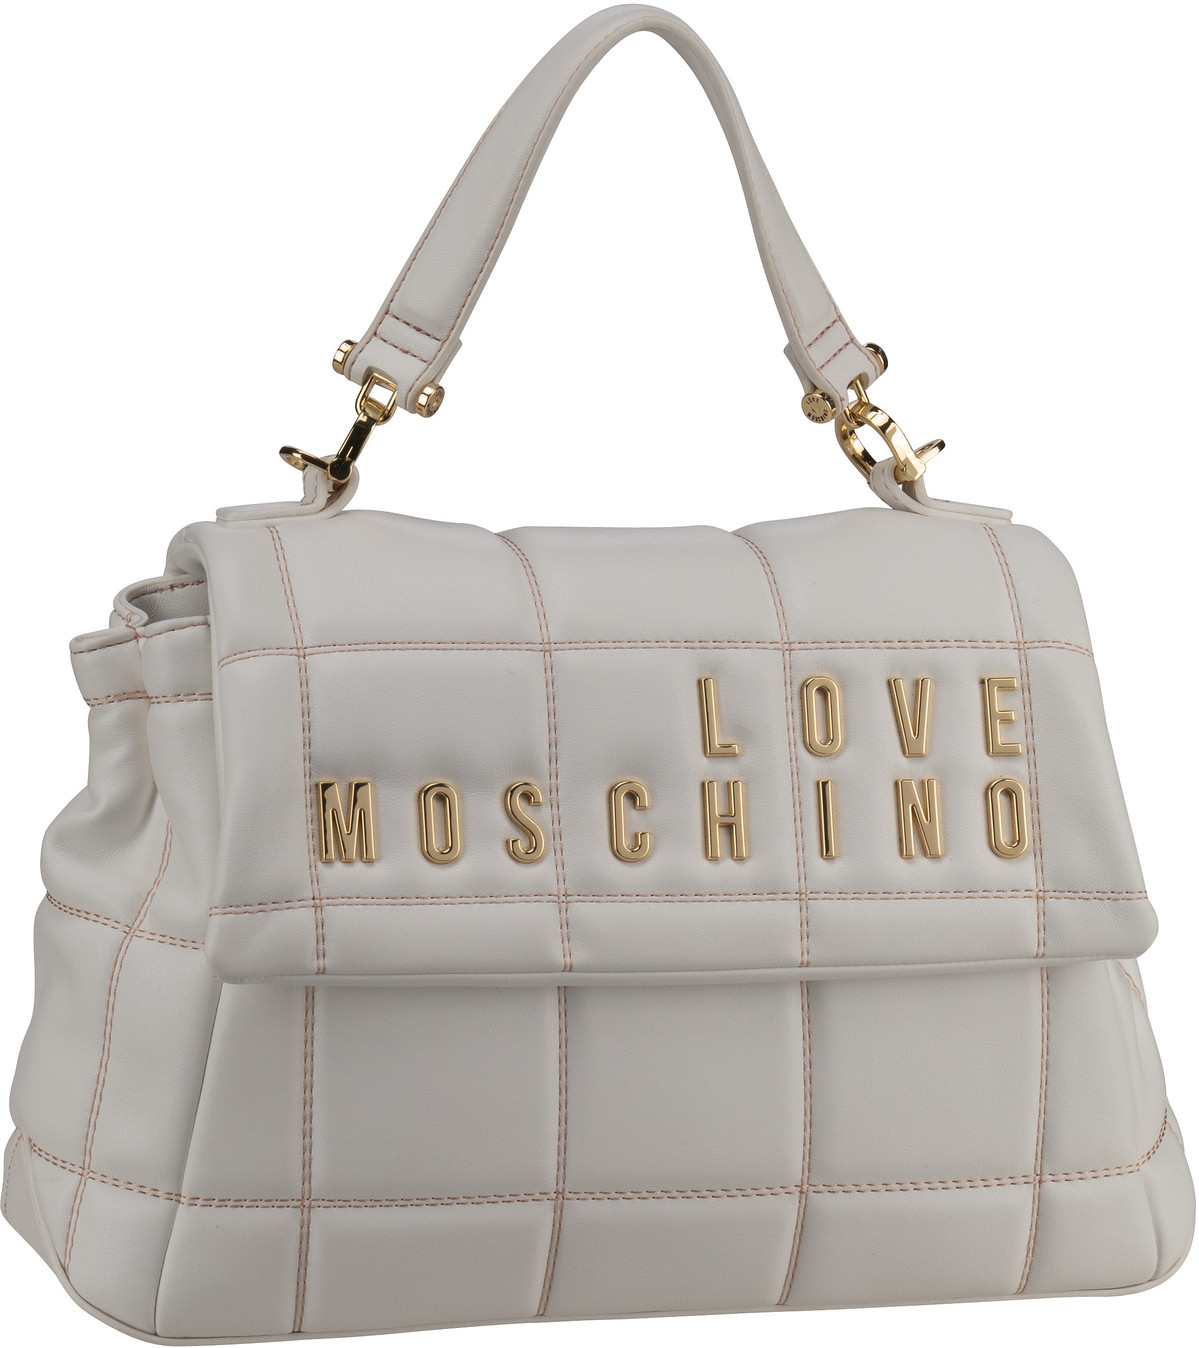 Love Moschino Embroidery Quilted Handbag 4264 - White